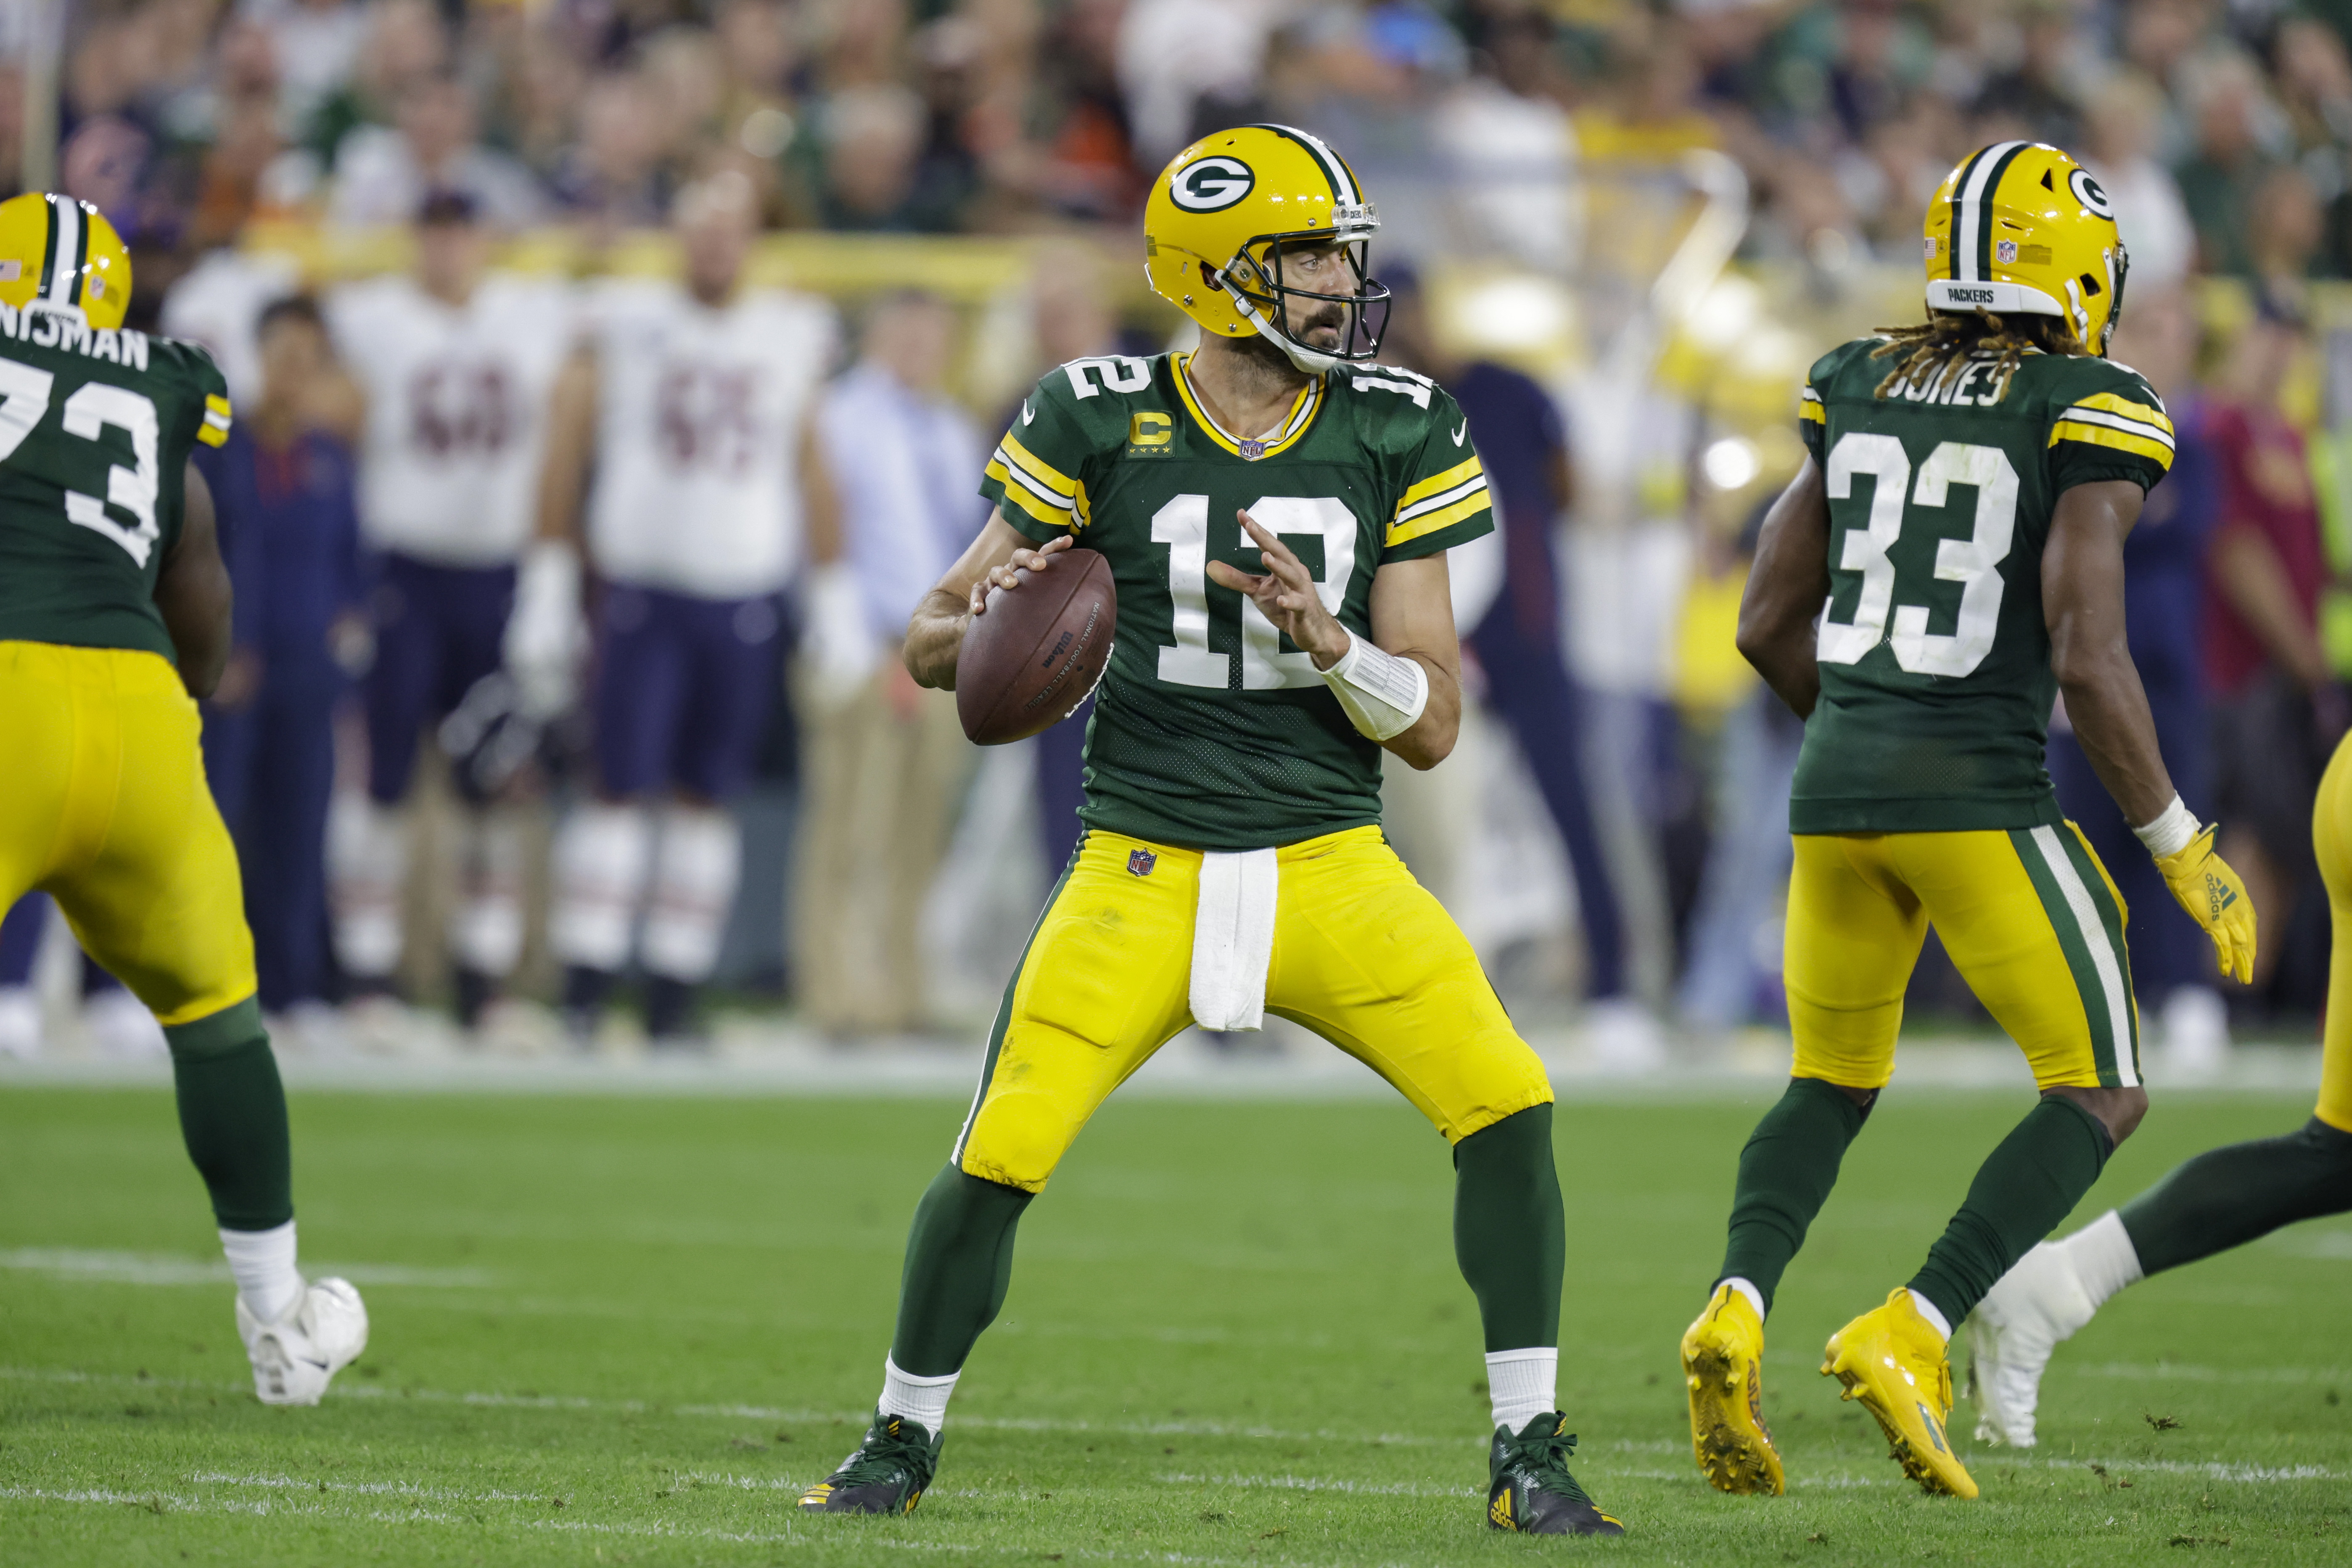 How to Watch the Green Bay Packers vs. Tampa Bay Buccaneers - NFL Week 3